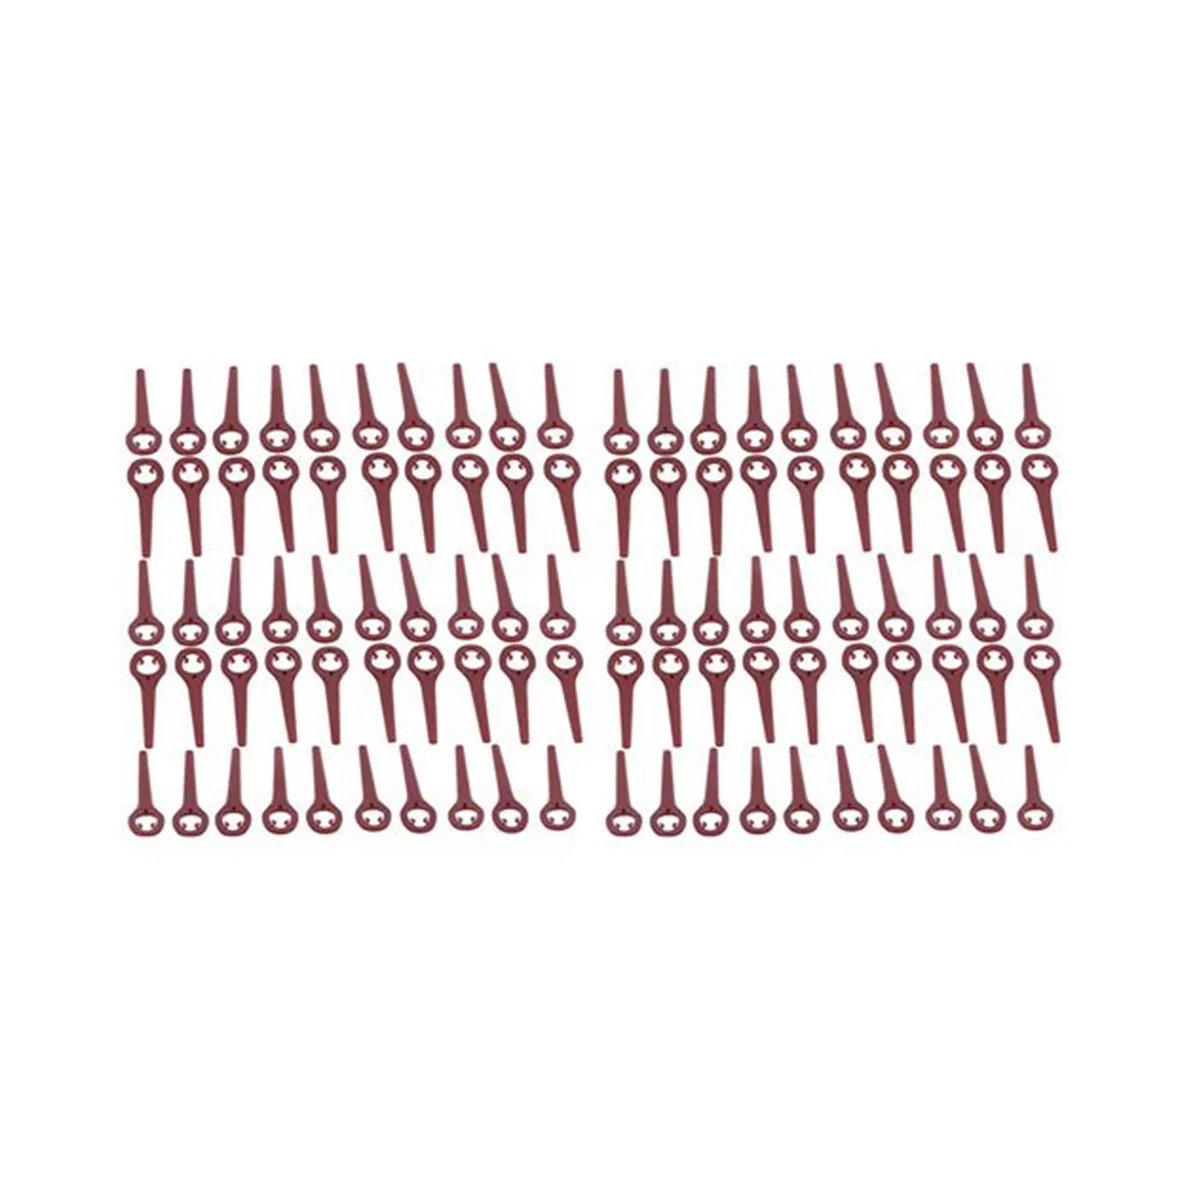 

100 Pack Lawn Mower Blades Lawn Mower Plastic Blades Cutting Blades for Gardening Replacement Knives